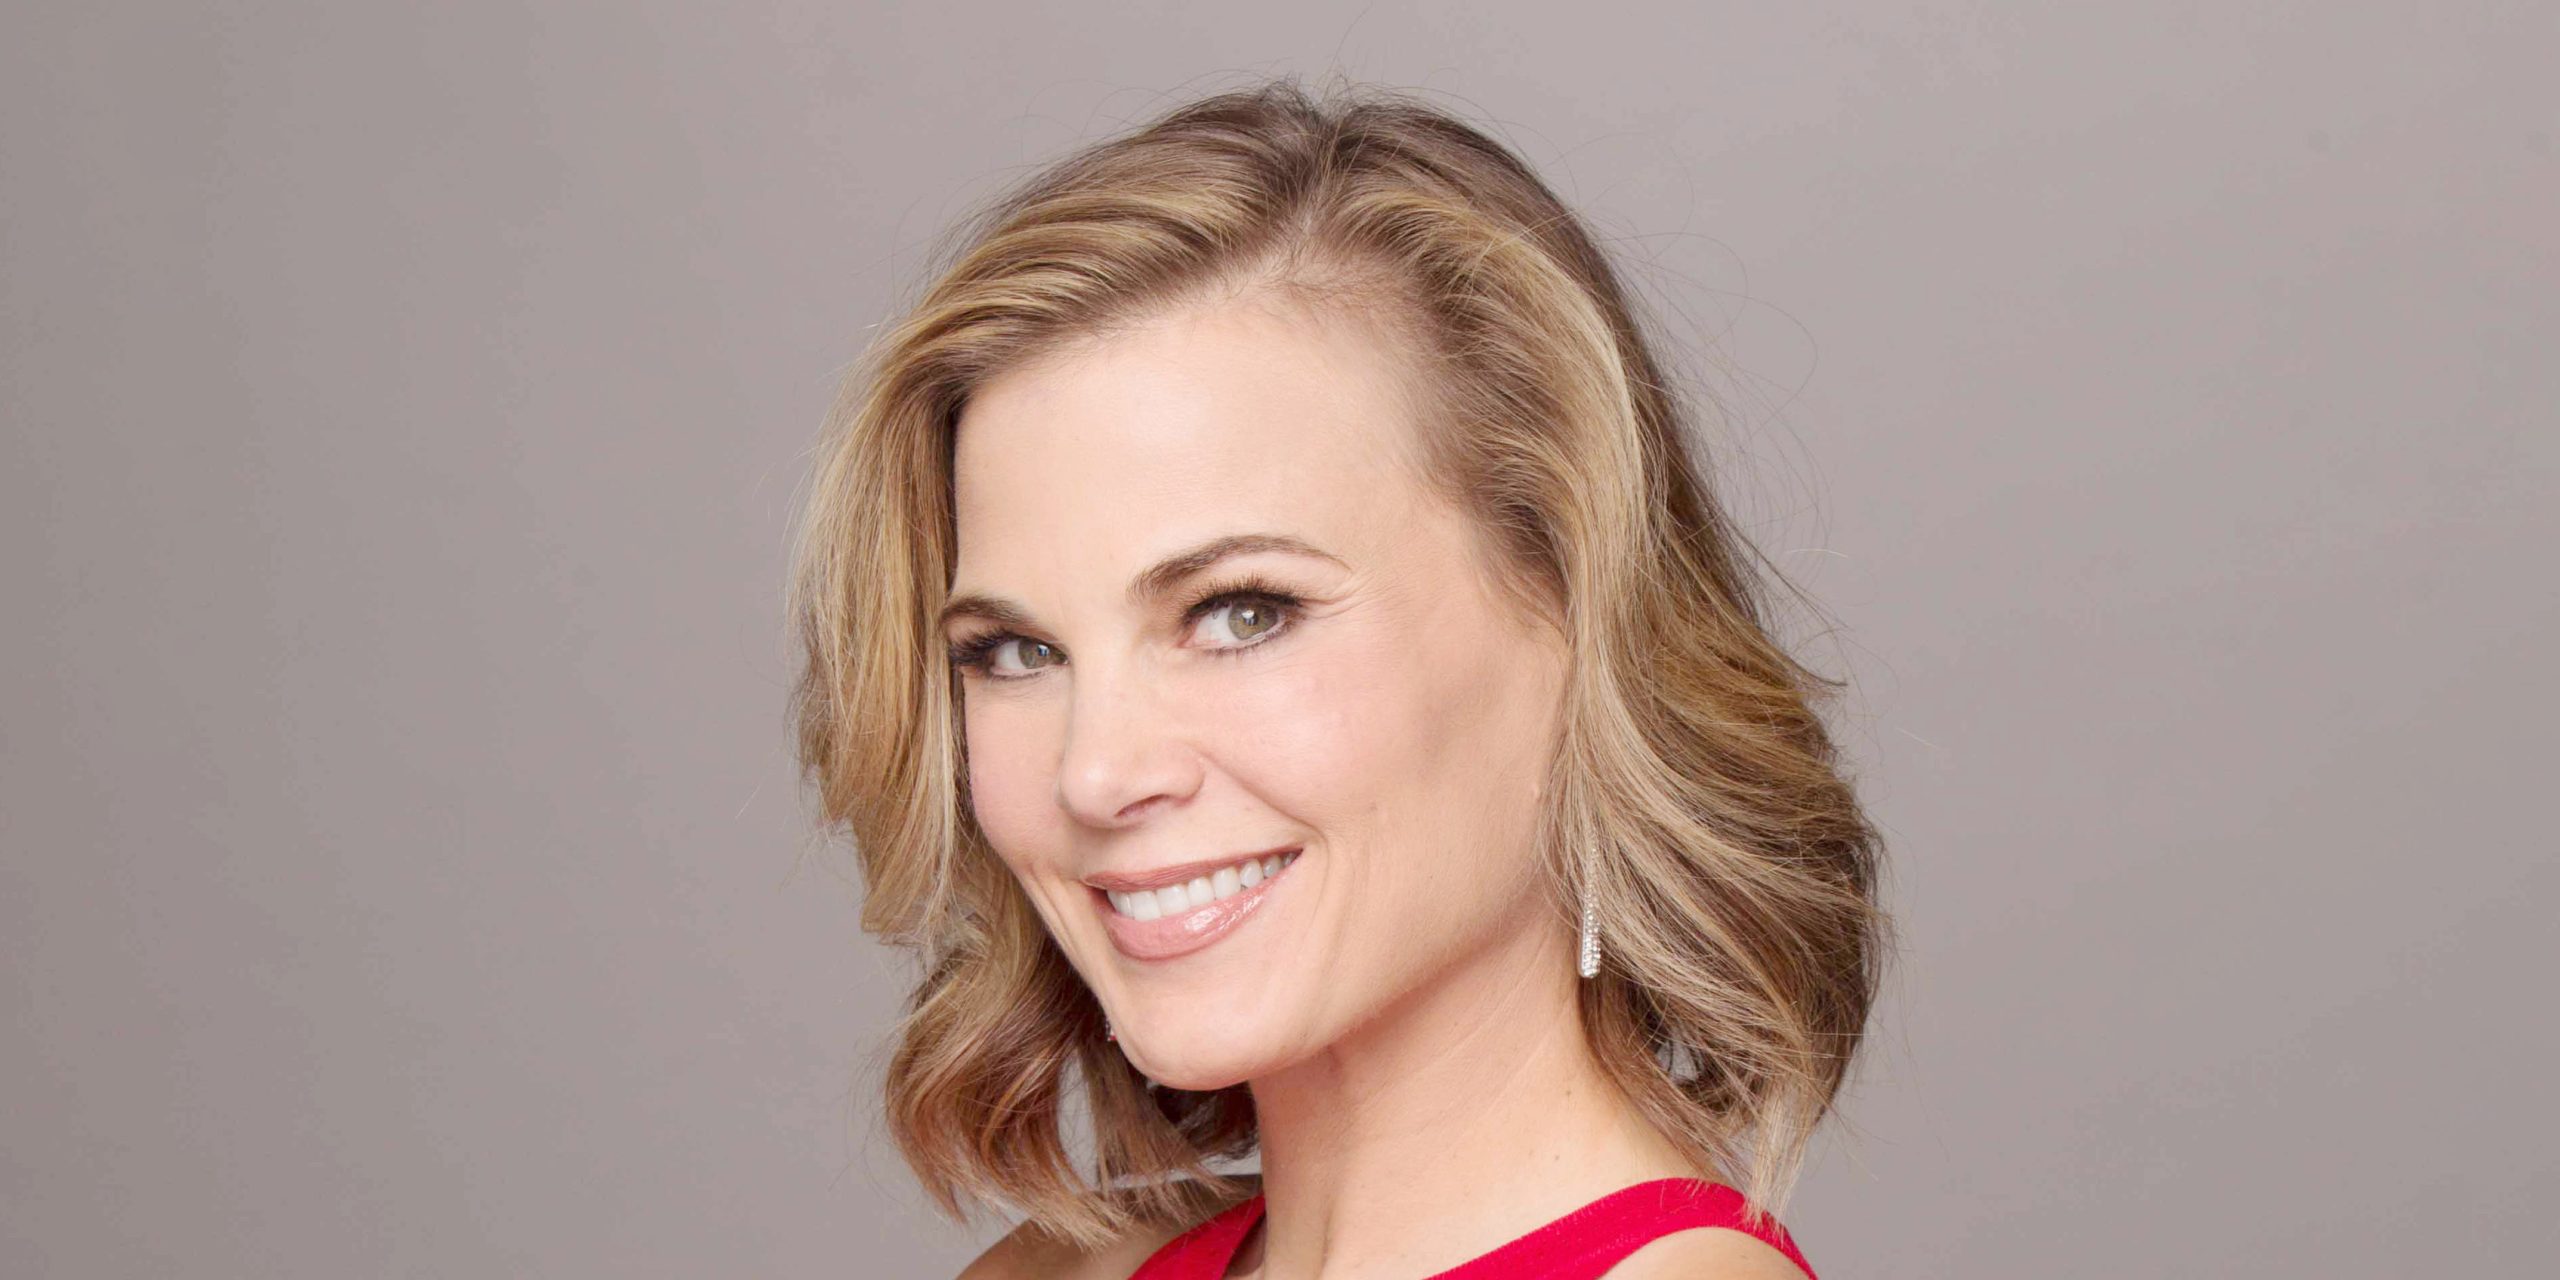 Naked Truth Of "Young and the Restless" Star - Gina Tognoni.